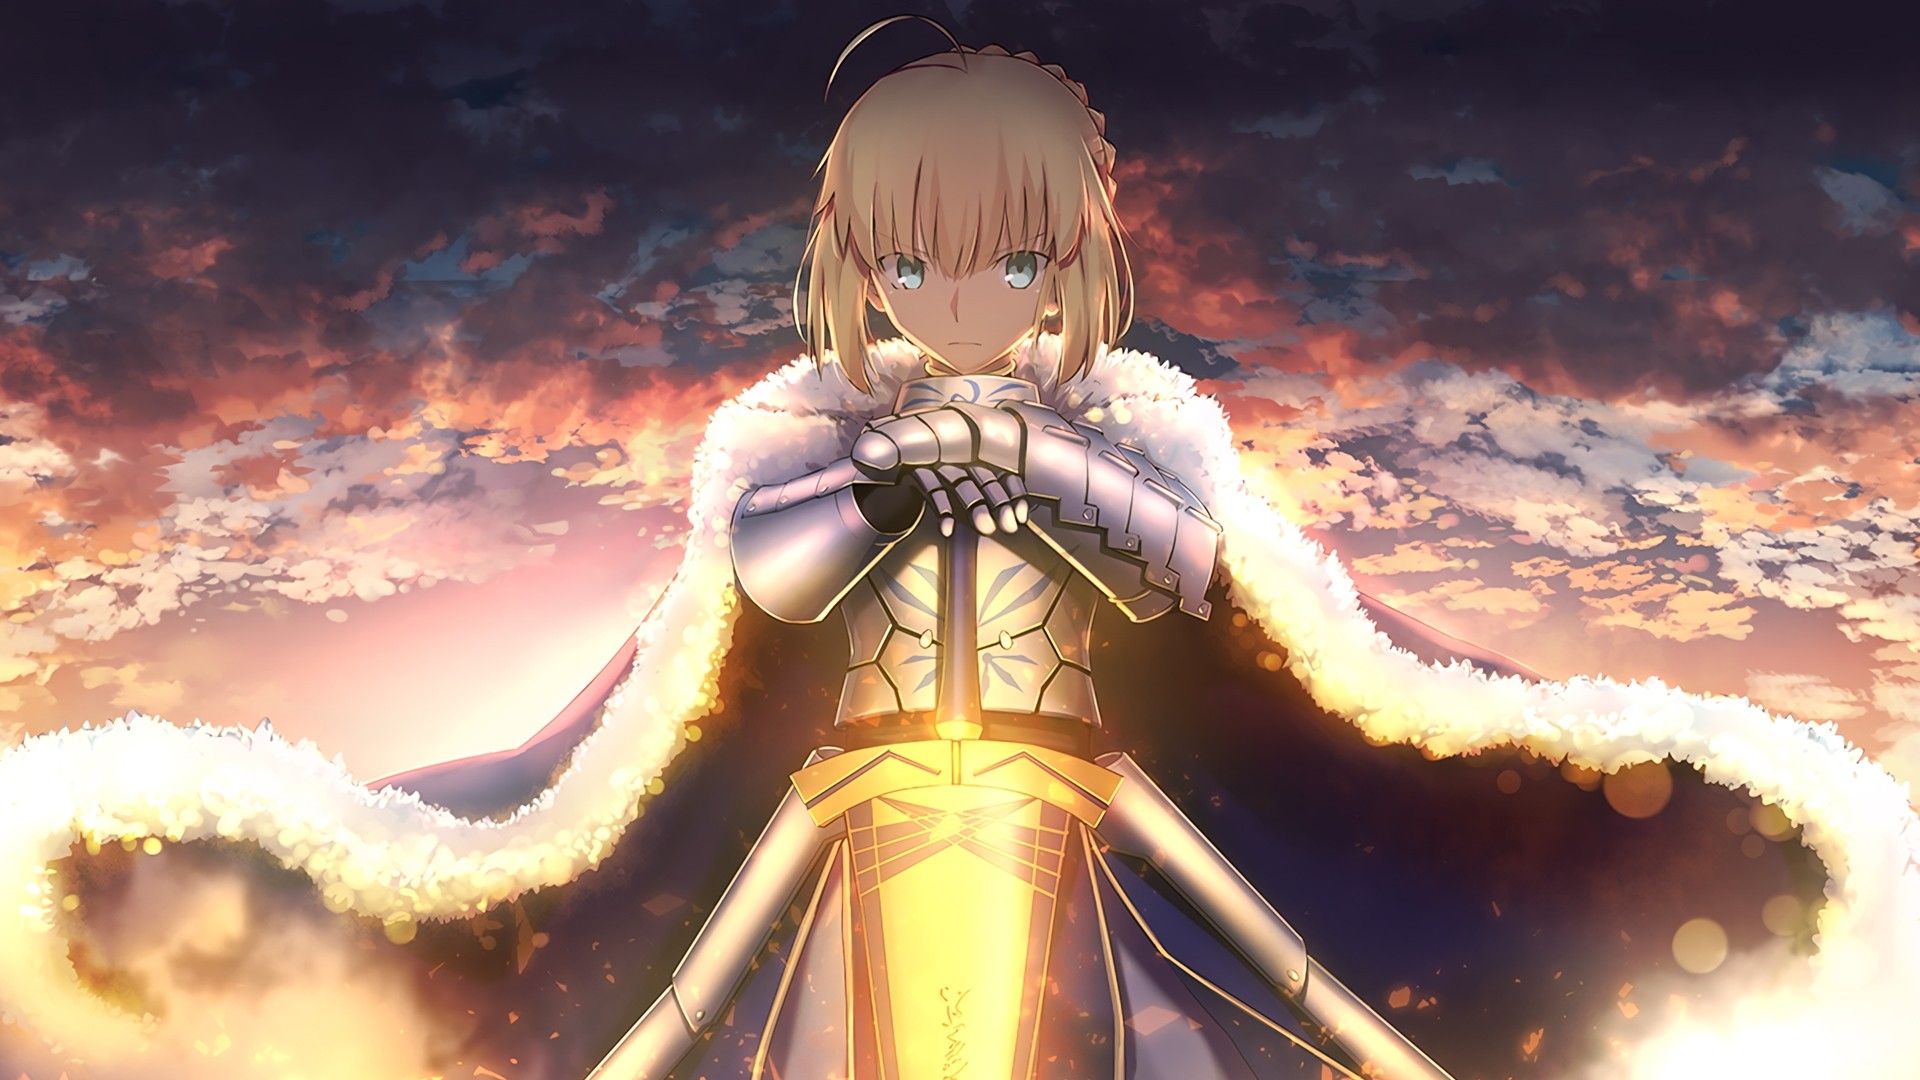 Fate Stay Night Saber Wallpaper: Image, Anime Category